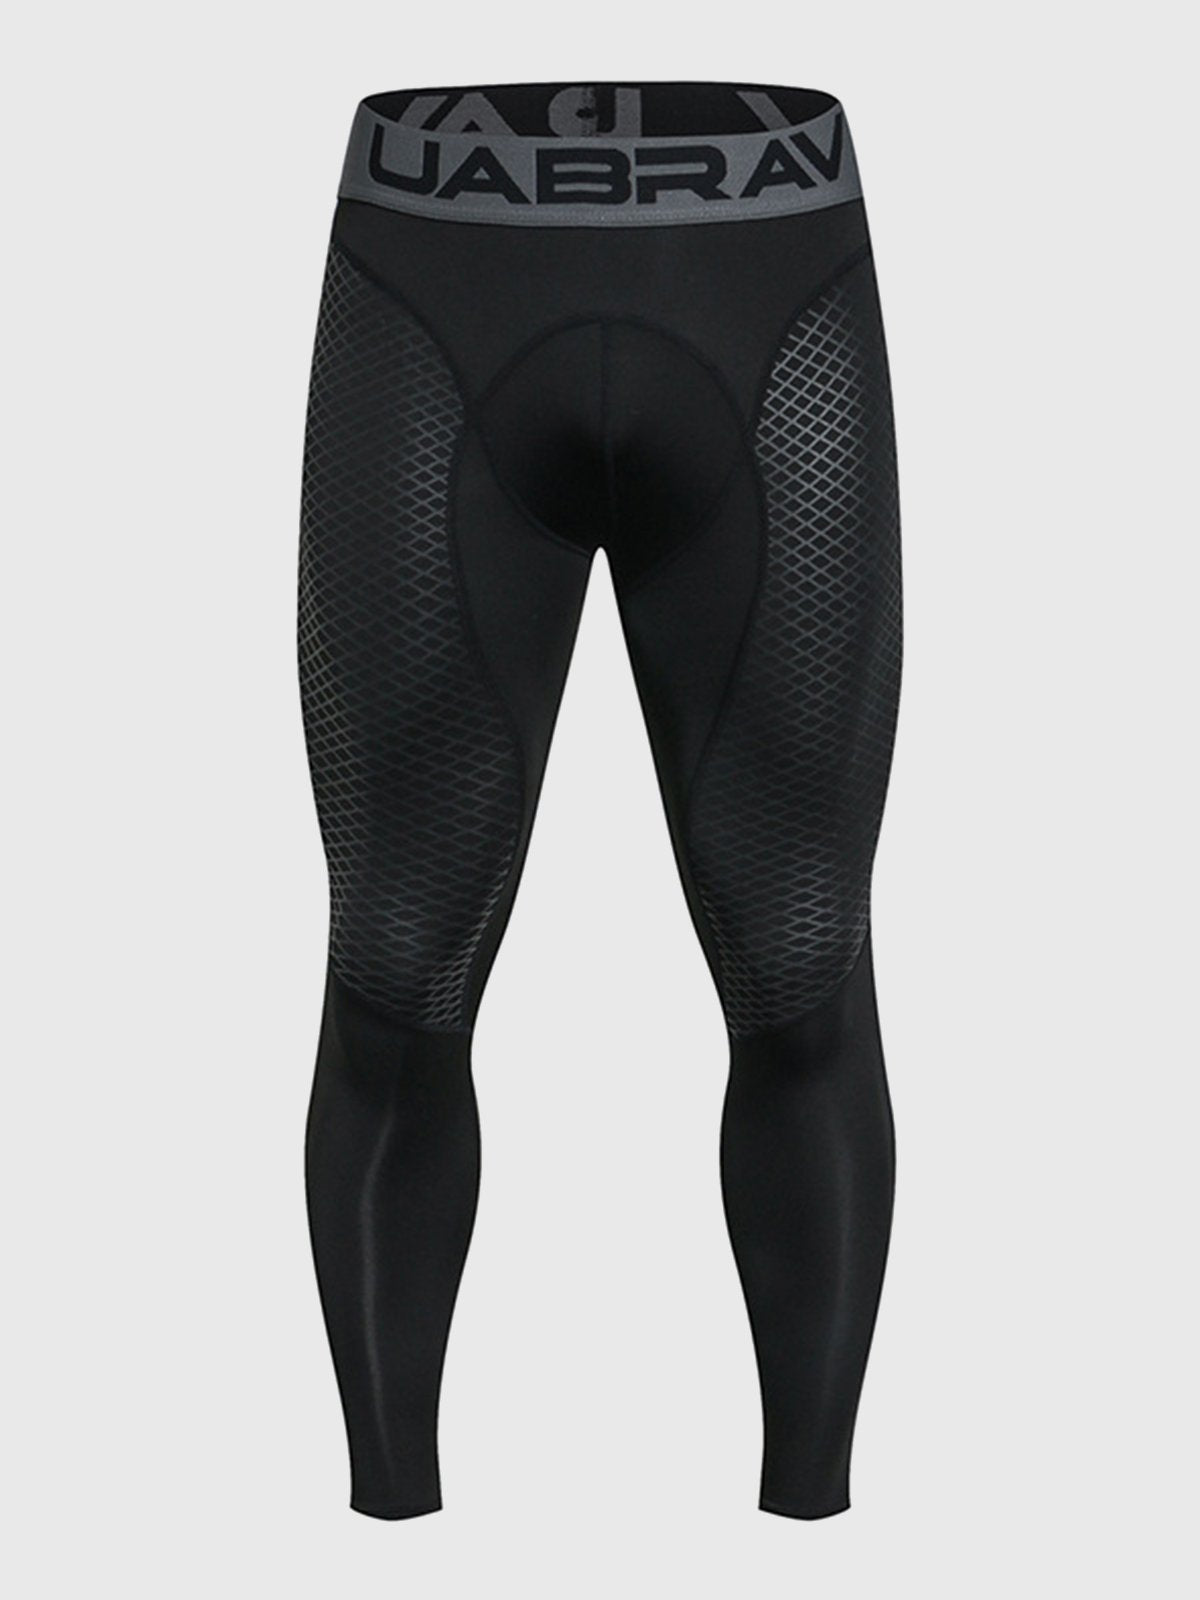 M's Athletic Compression Tights-Zittor